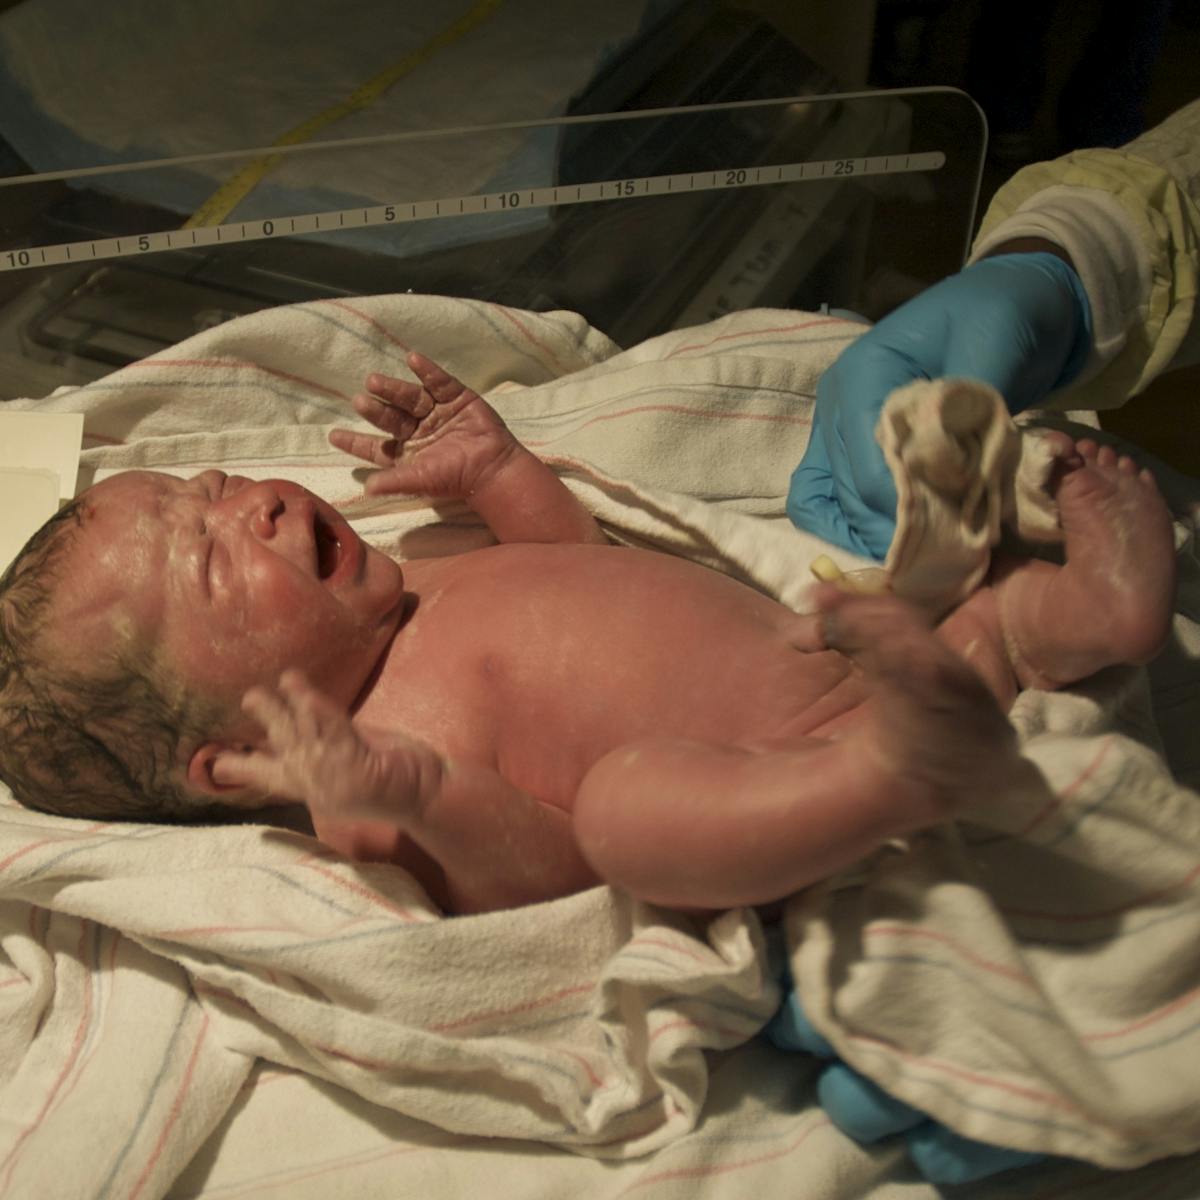 This is what happens to a baby's body during birth